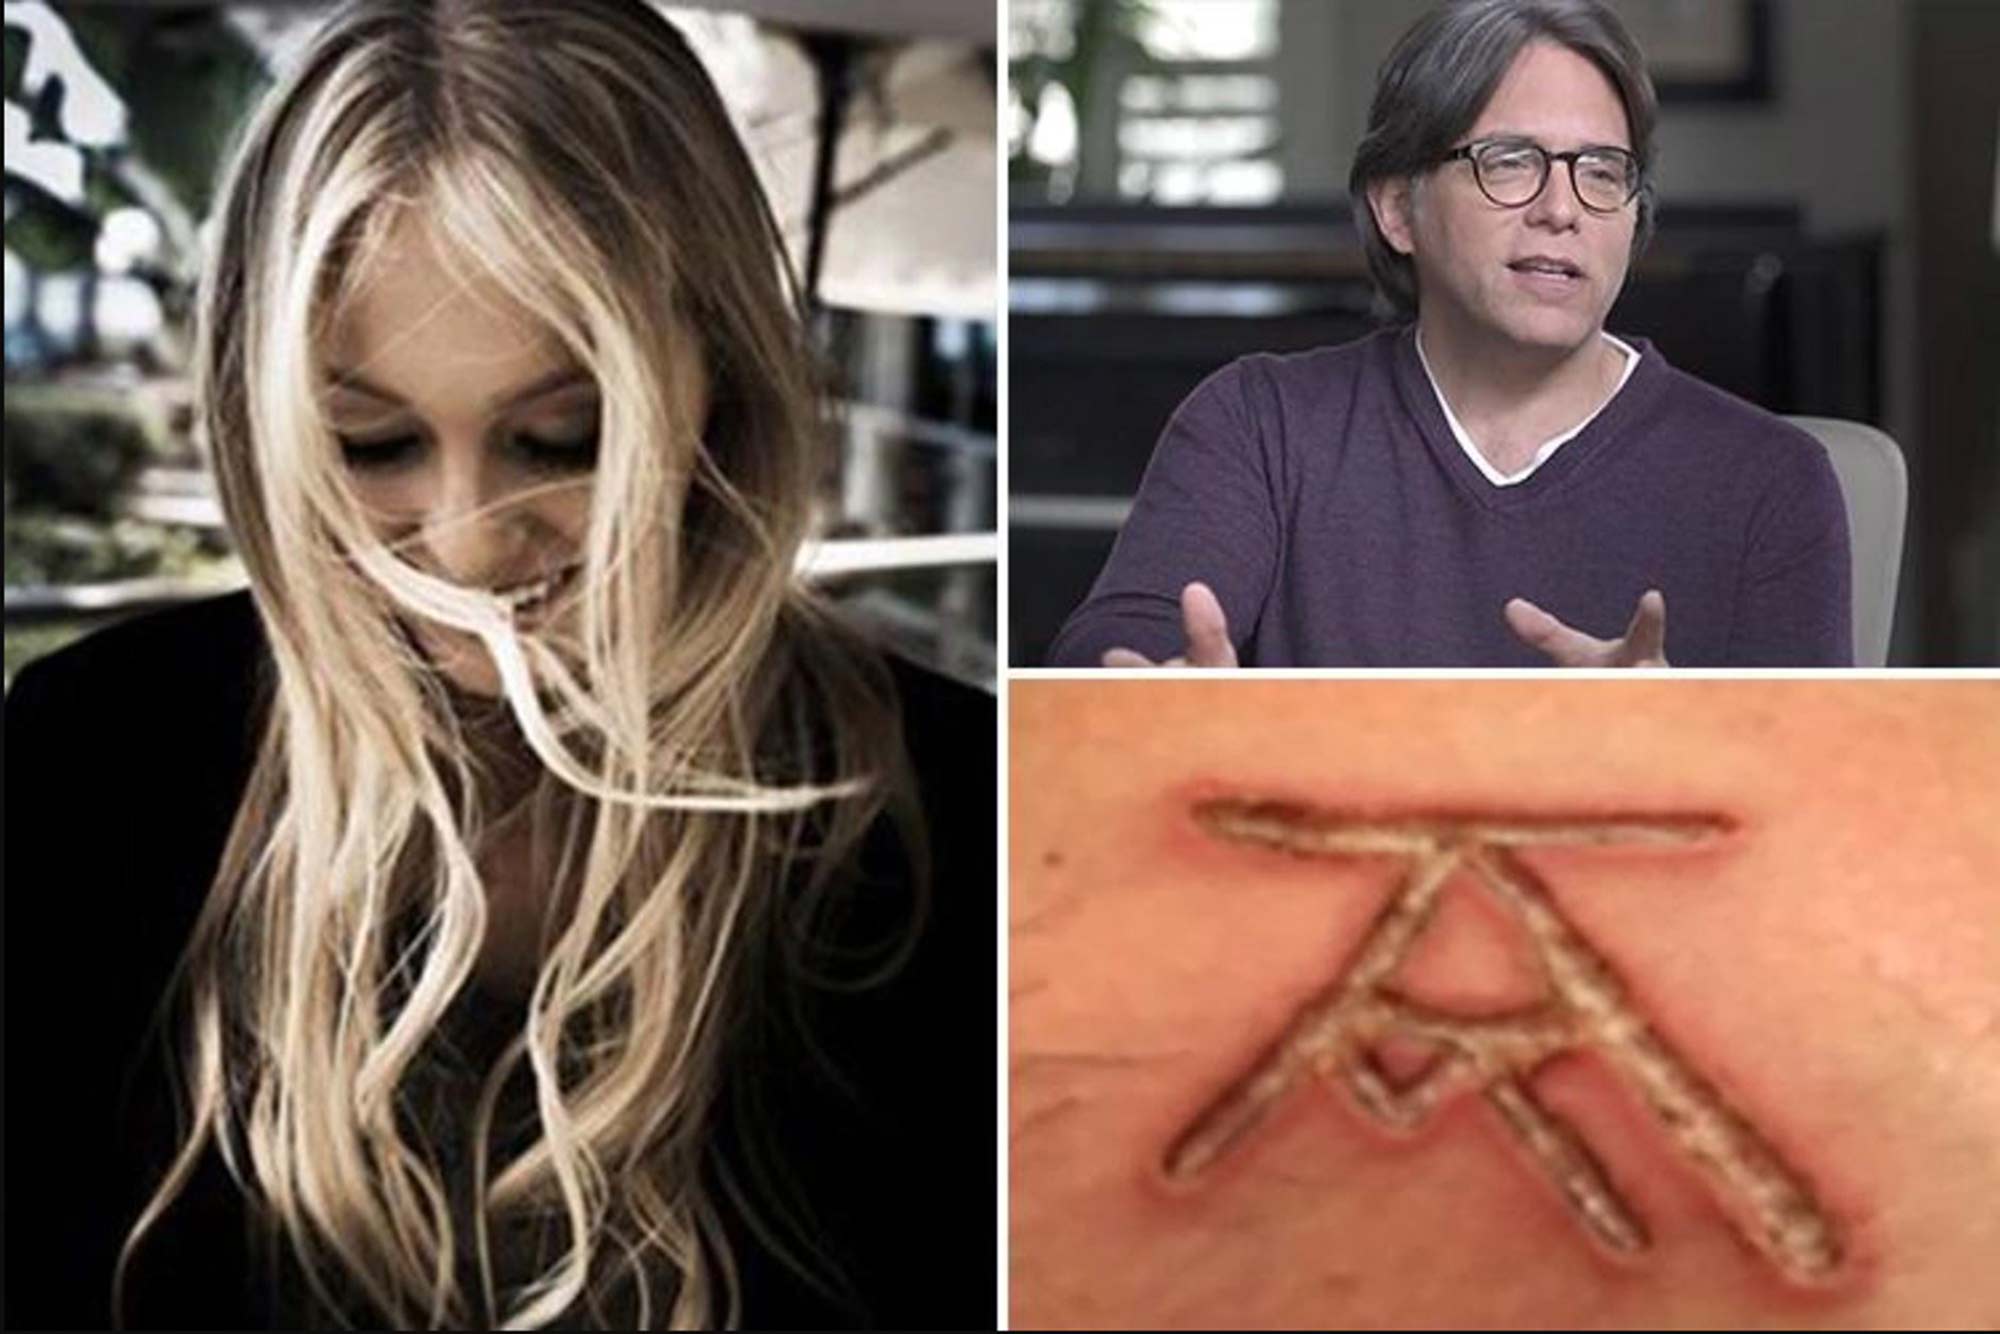 The NXIVM brand: The awful crimes committed by their secret cult – Film Daily